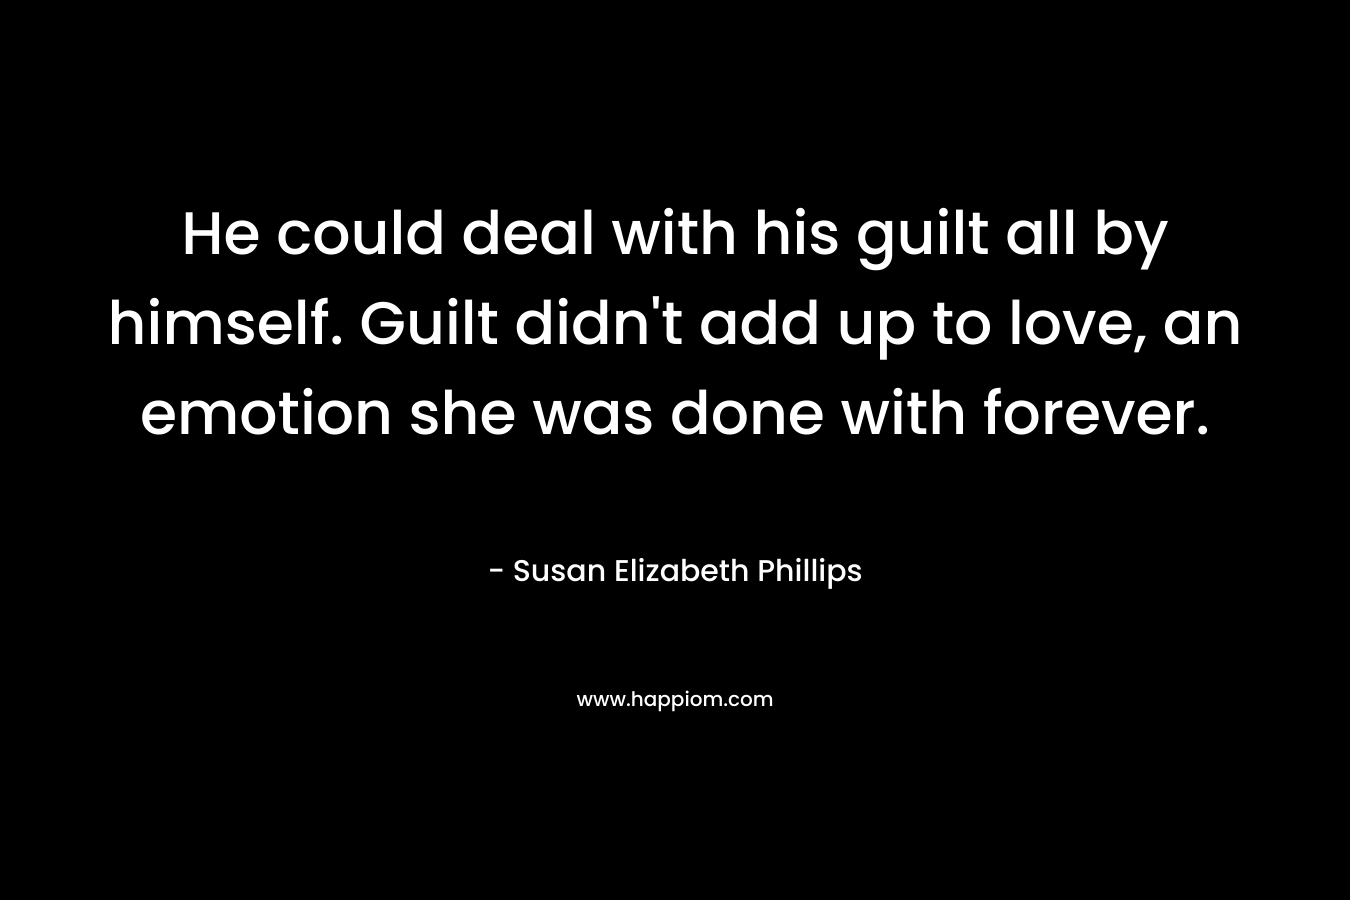 He could deal with his guilt all by himself. Guilt didn’t add up to love, an emotion she was done with forever. – Susan Elizabeth Phillips